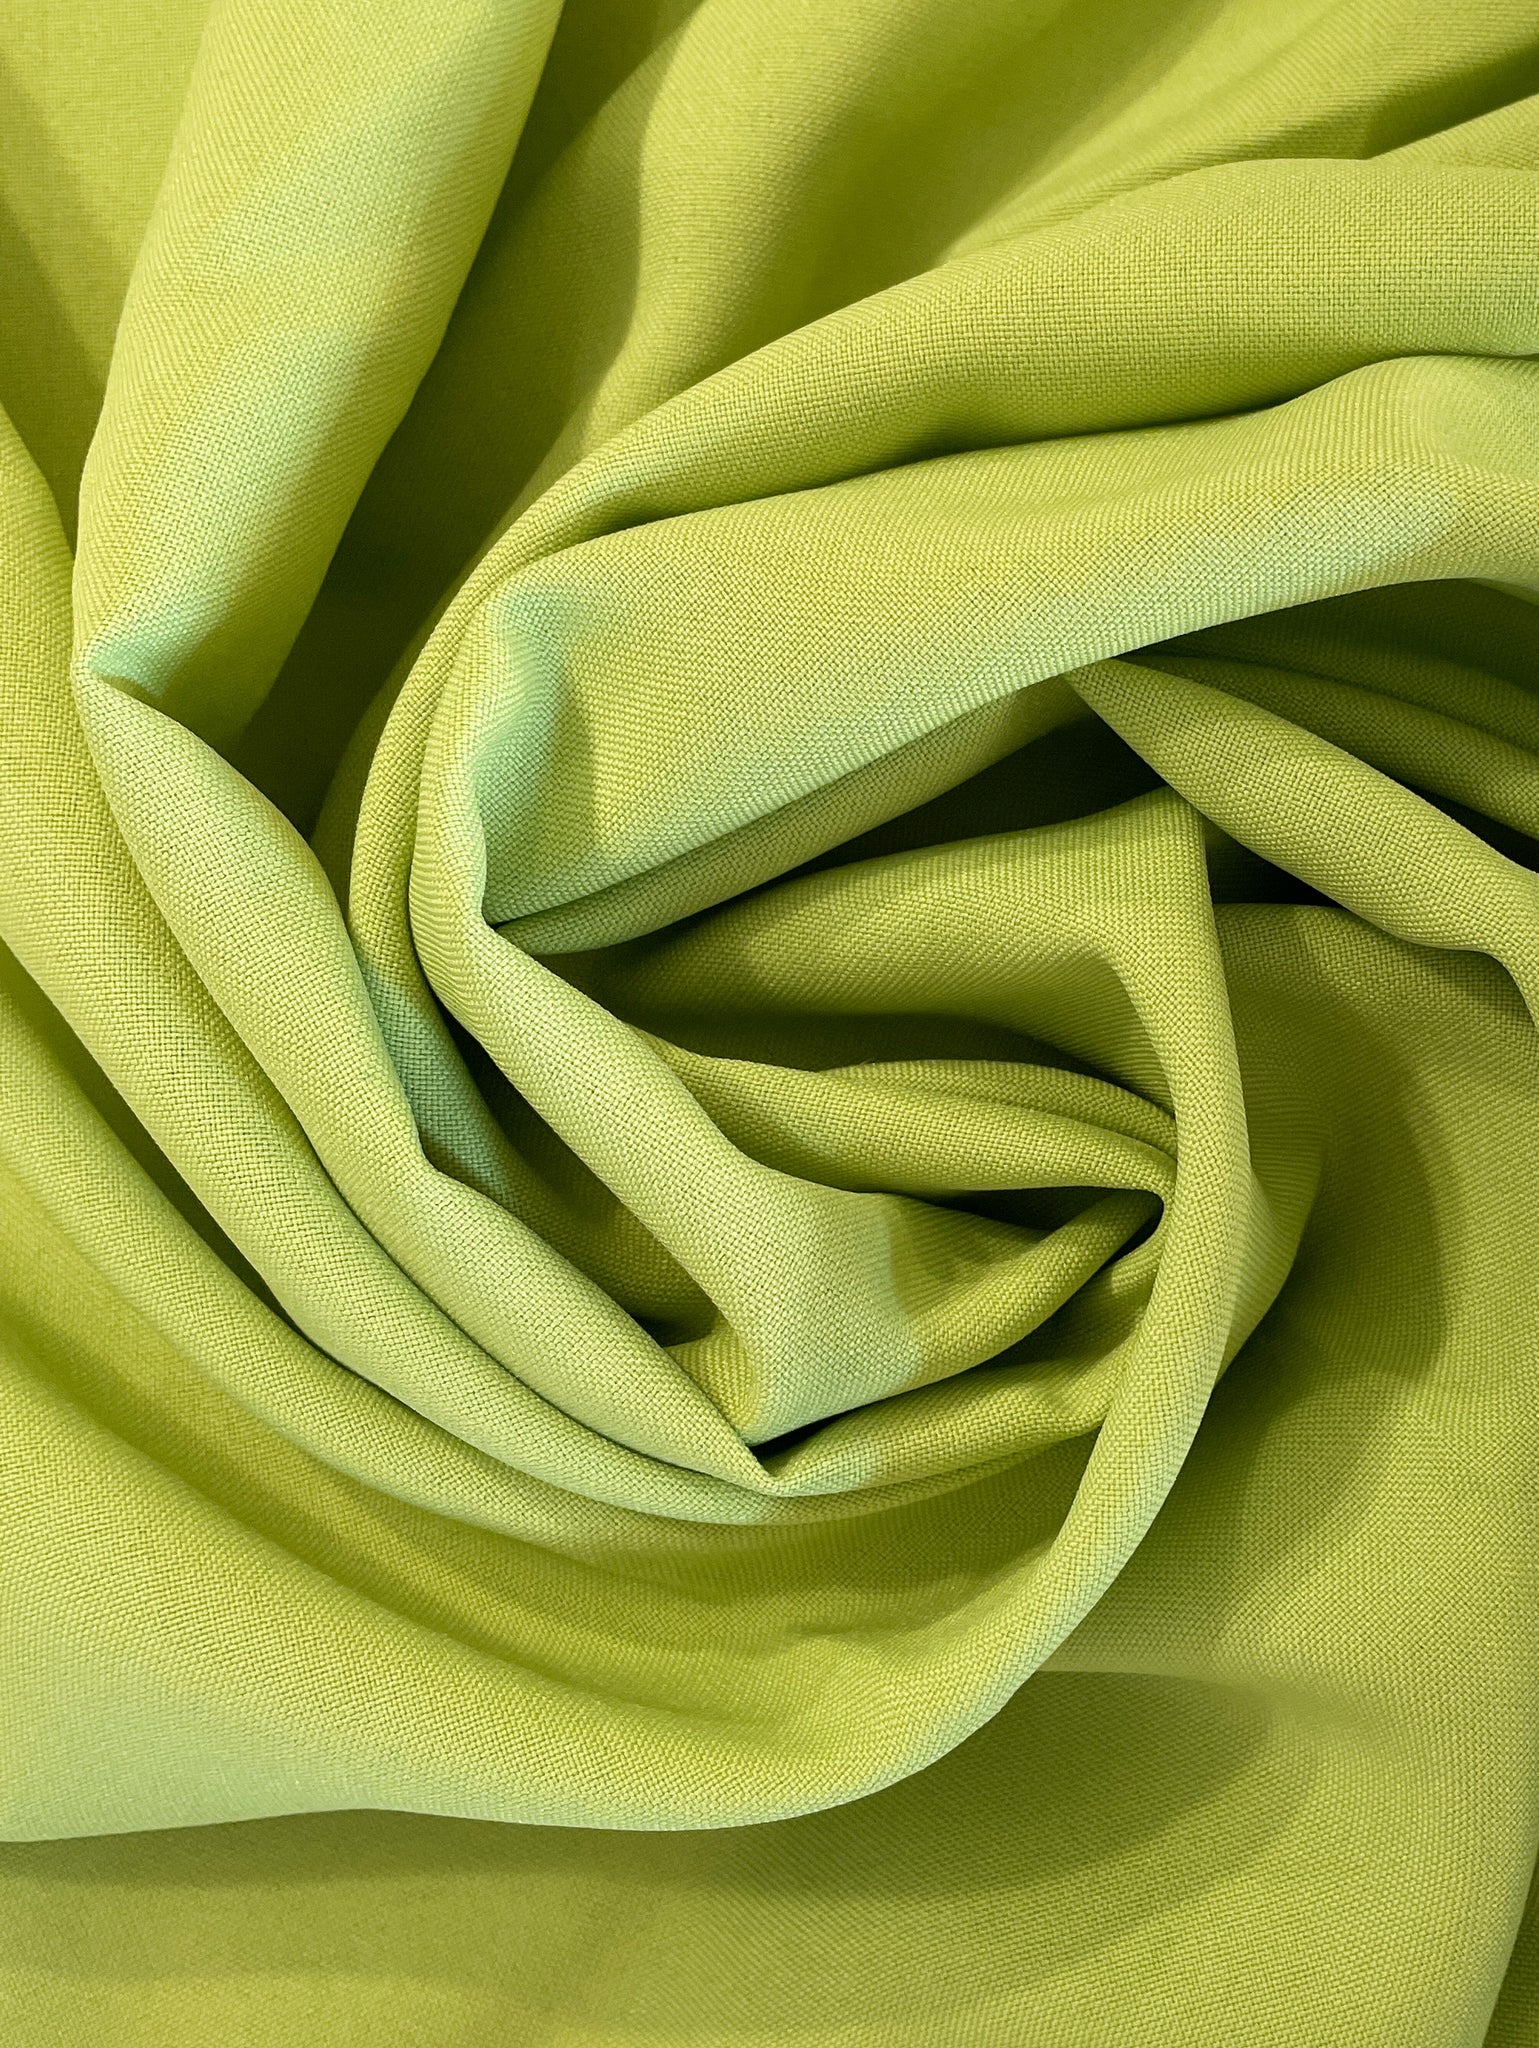 2 3/4 YD Polyester Plain Weave - Lime Green